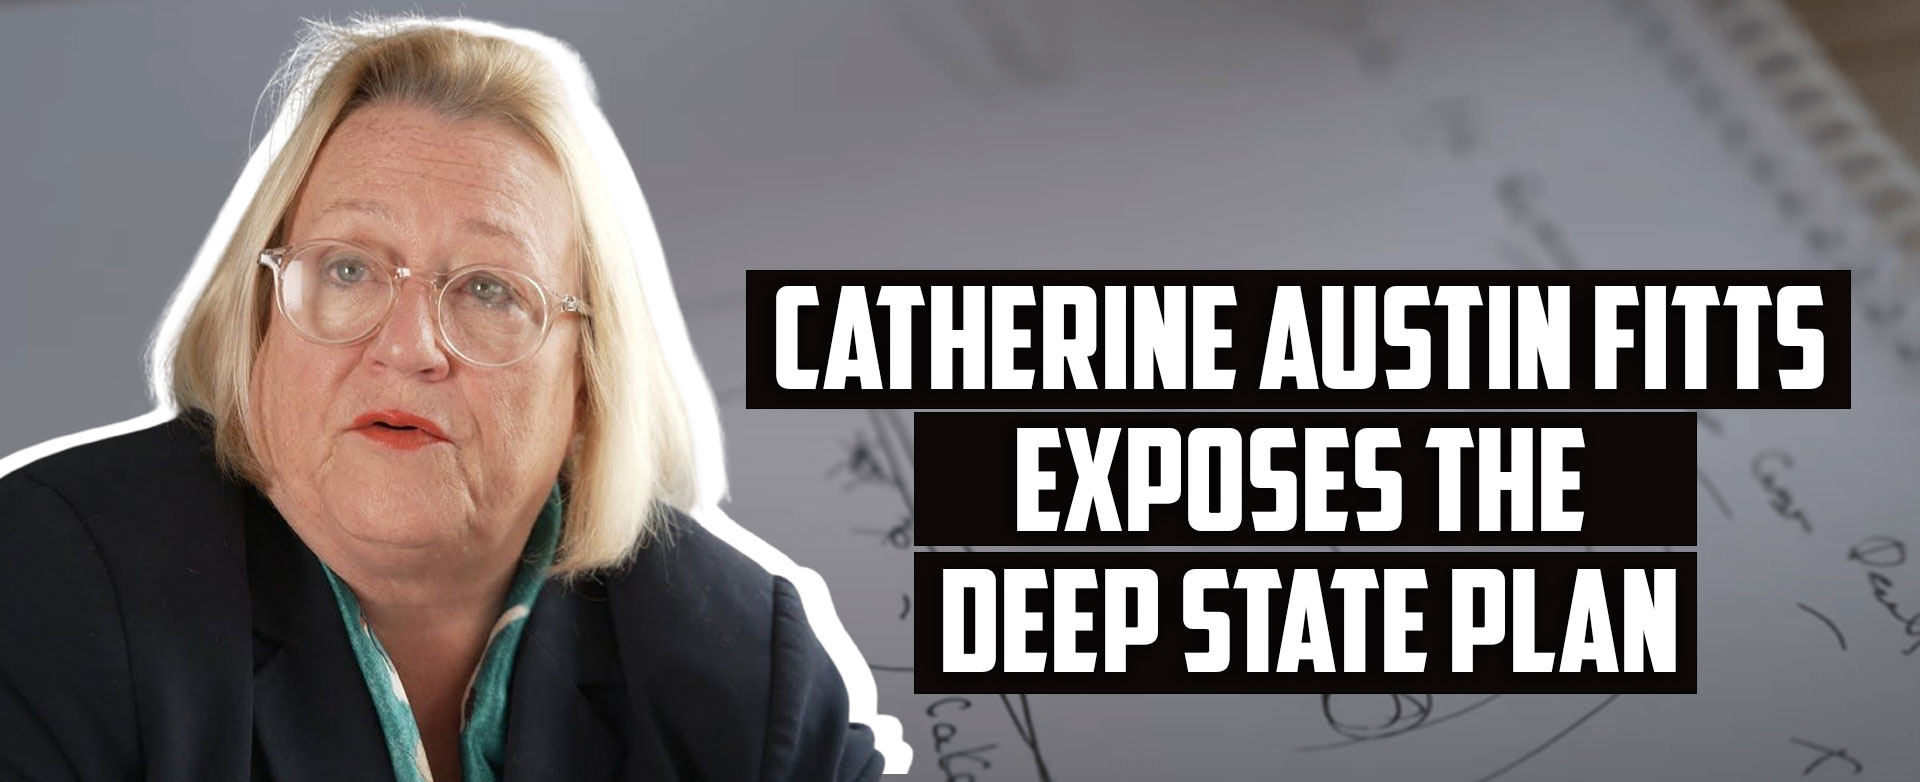 MyPatriotsNetwork-Catherine Austin Fitts Exposes The Deep State Plan